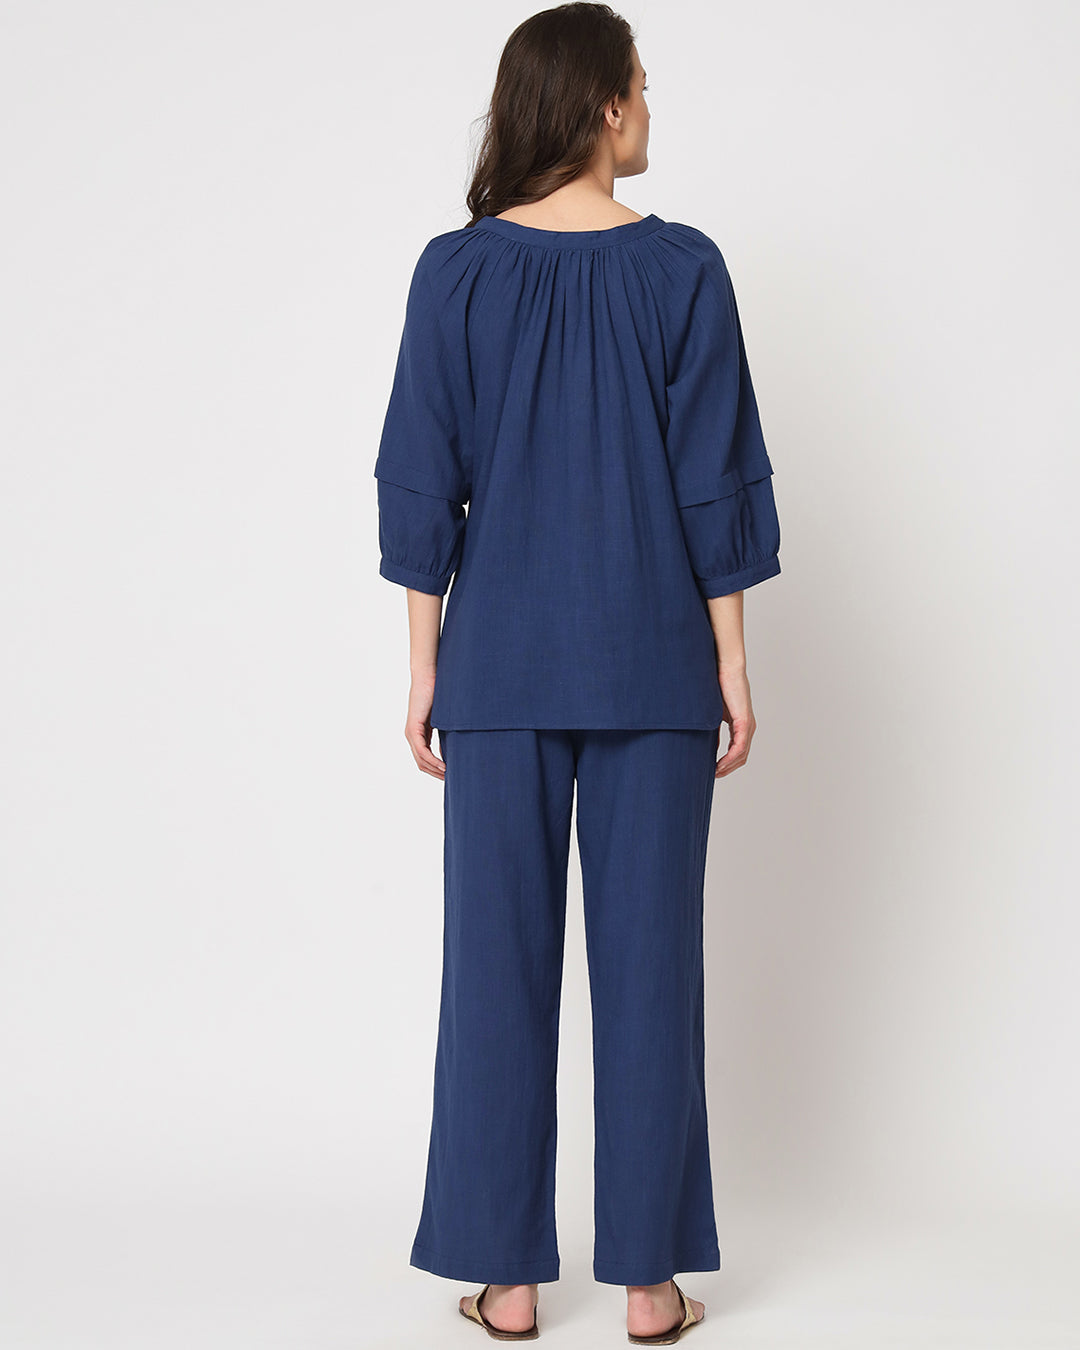 Midnight Blue Button Neck Solid Top (Without Bottoms)